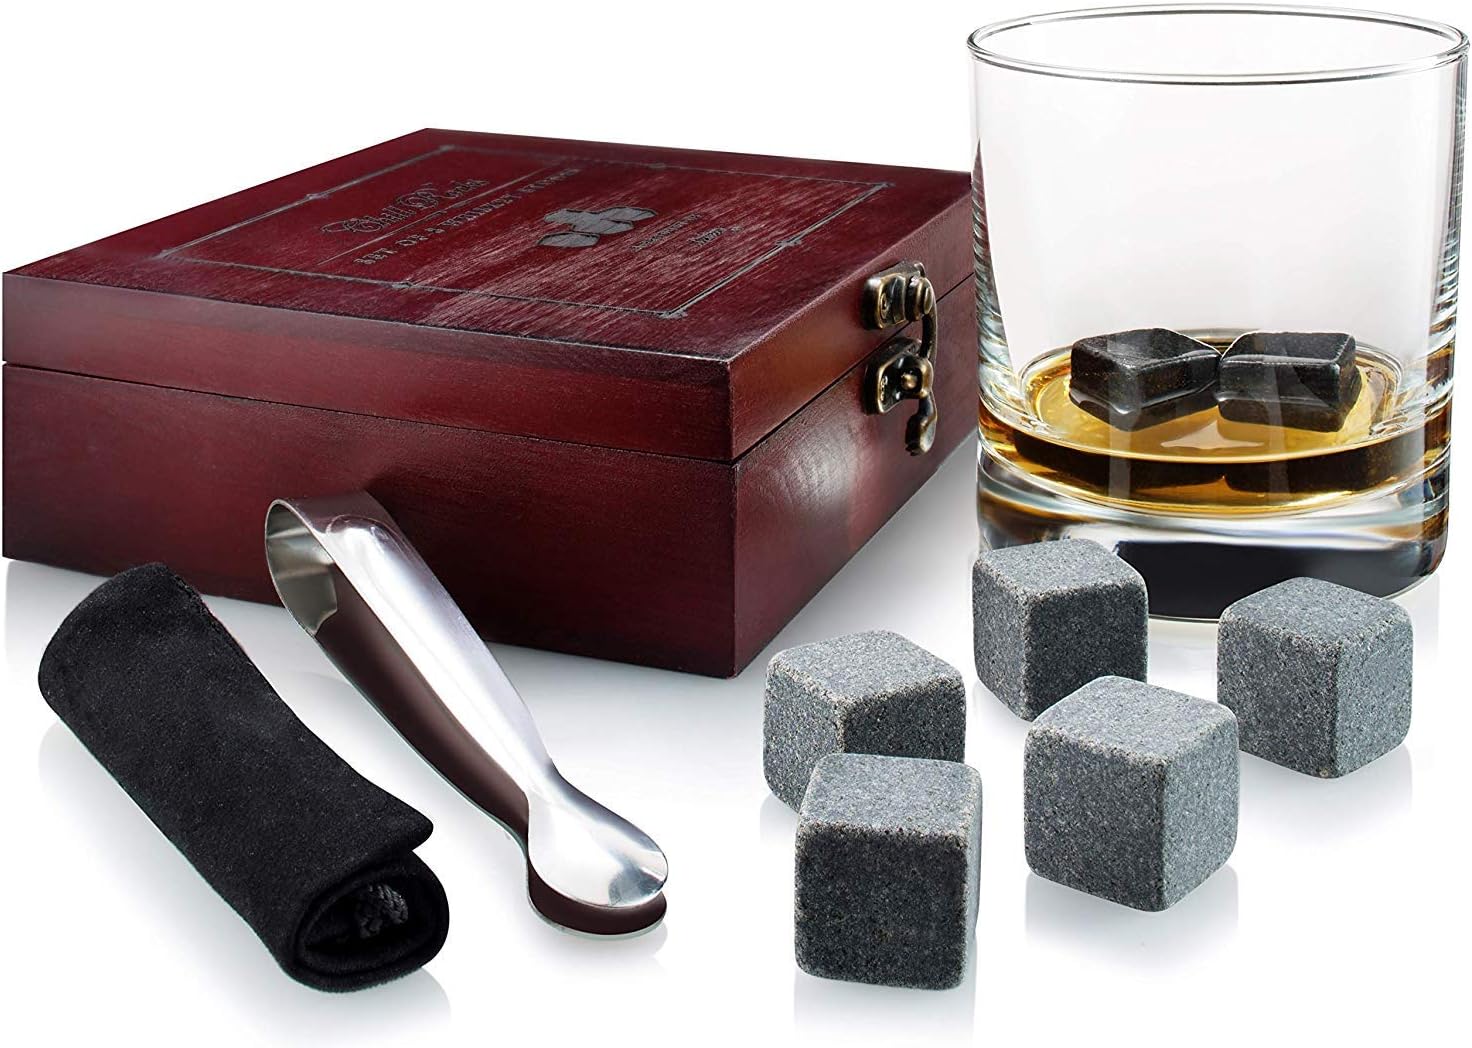 Gift Set of 8 Whiskey Chilling Stones [Chill Rocks] - in Premium Wooden Gift Box with Stainless Steel Tongs and Velvet Carrying Pouch - Made of Pure Soapstone - by Quiseen